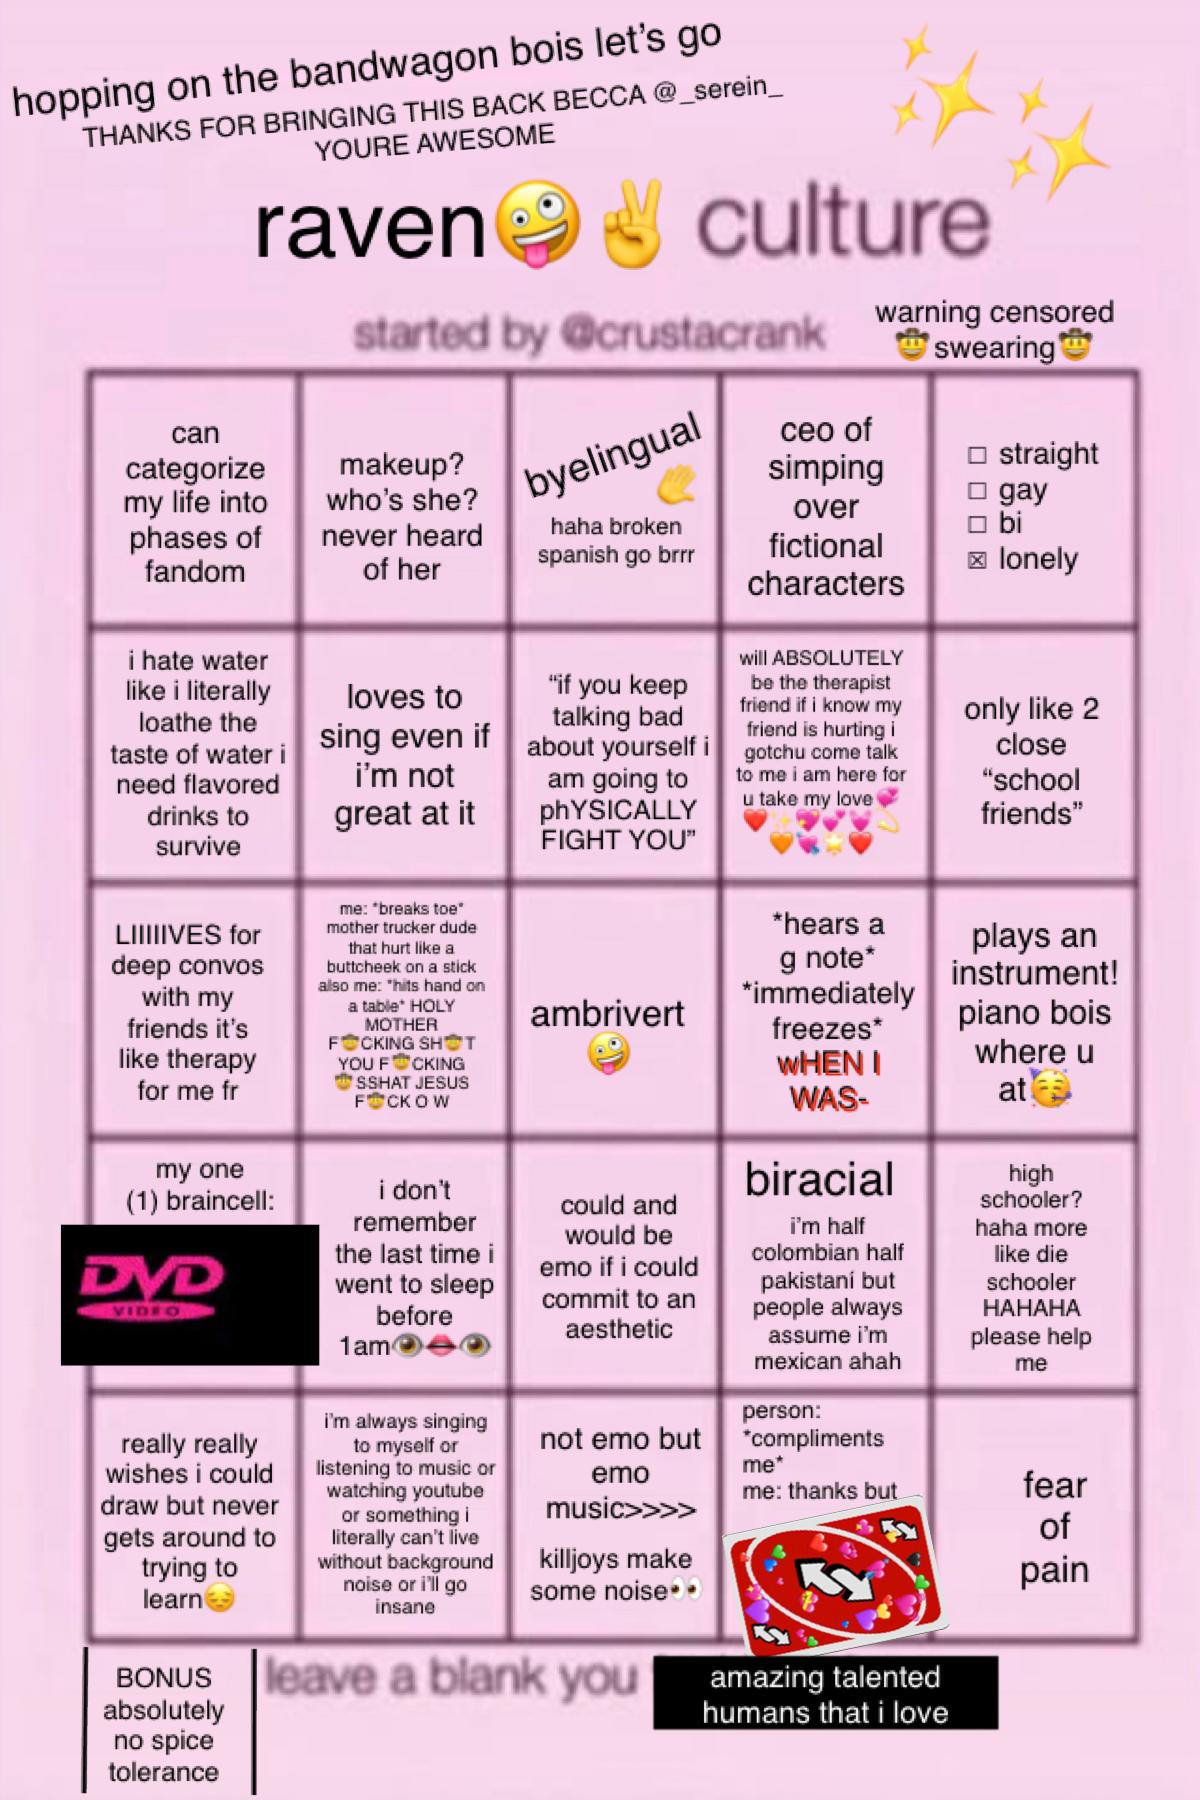 I DID THE THING :DD i actually put quite a bit of thought into this so i hope it doesn’t flop🥺 there was so much more i wanted to put but it wouldn’t fit,, anyways have fun with this lol